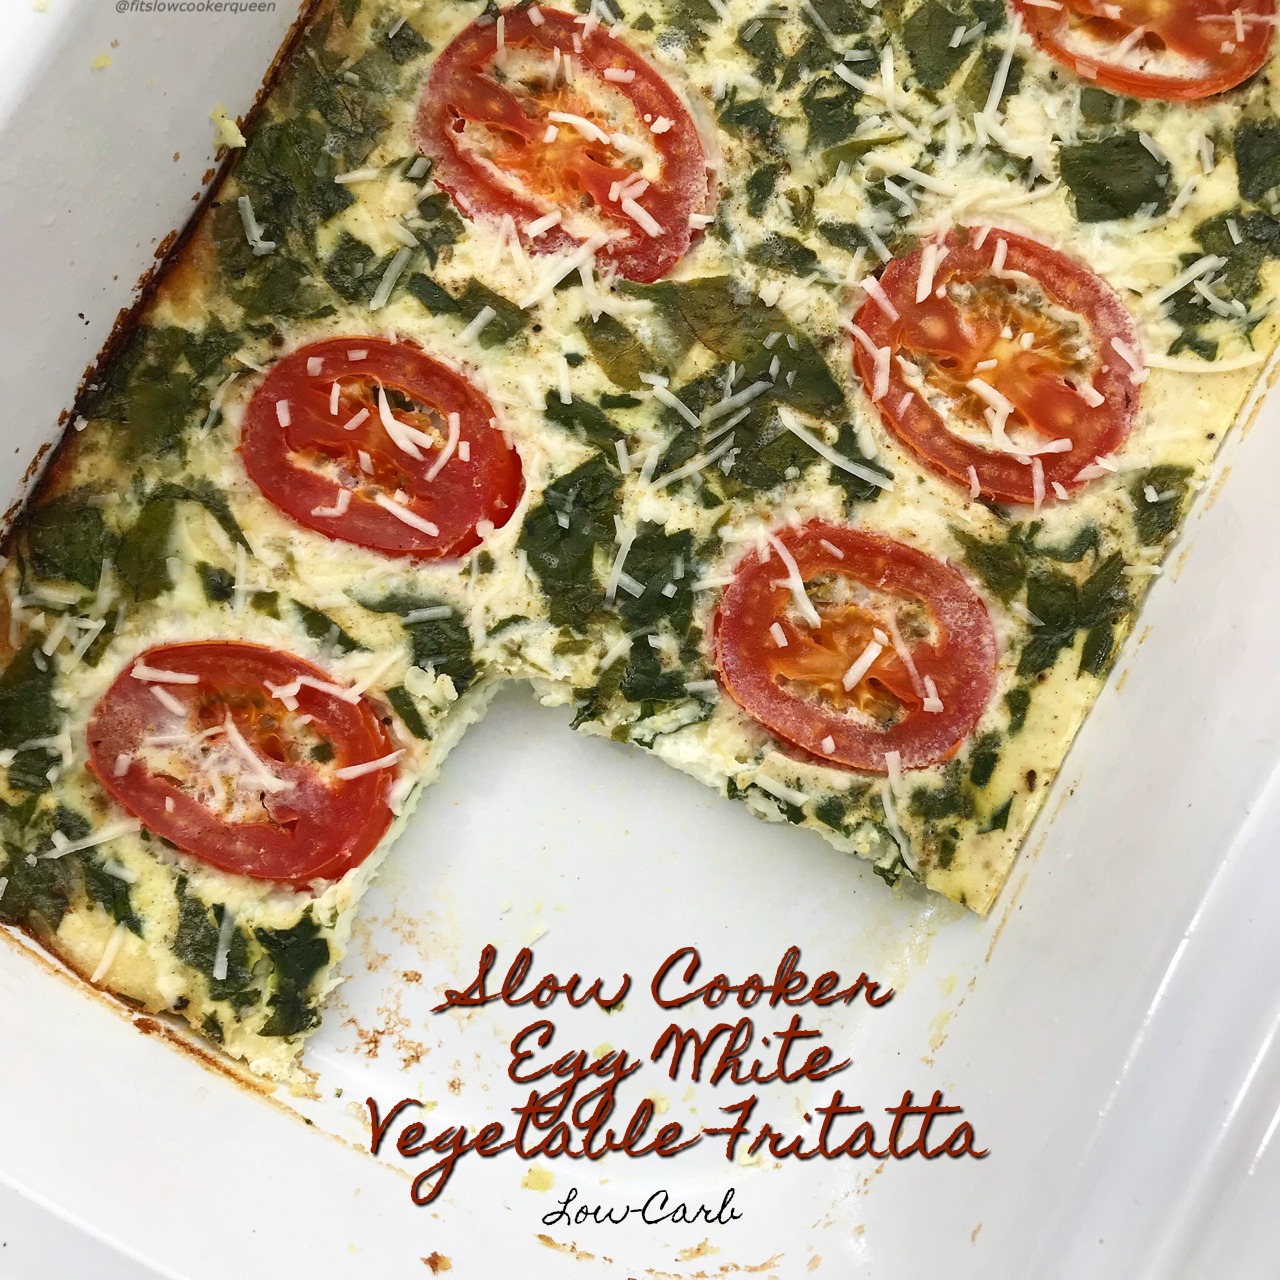 An egg white frittata is a great low-sodium, low-calorie, and low-carb breakfast or brunch option. Load this frittata up with your favorite vegetables and cook it overnight in the slow cooker to wake up to an easy & healthy vegetarian breakfast.